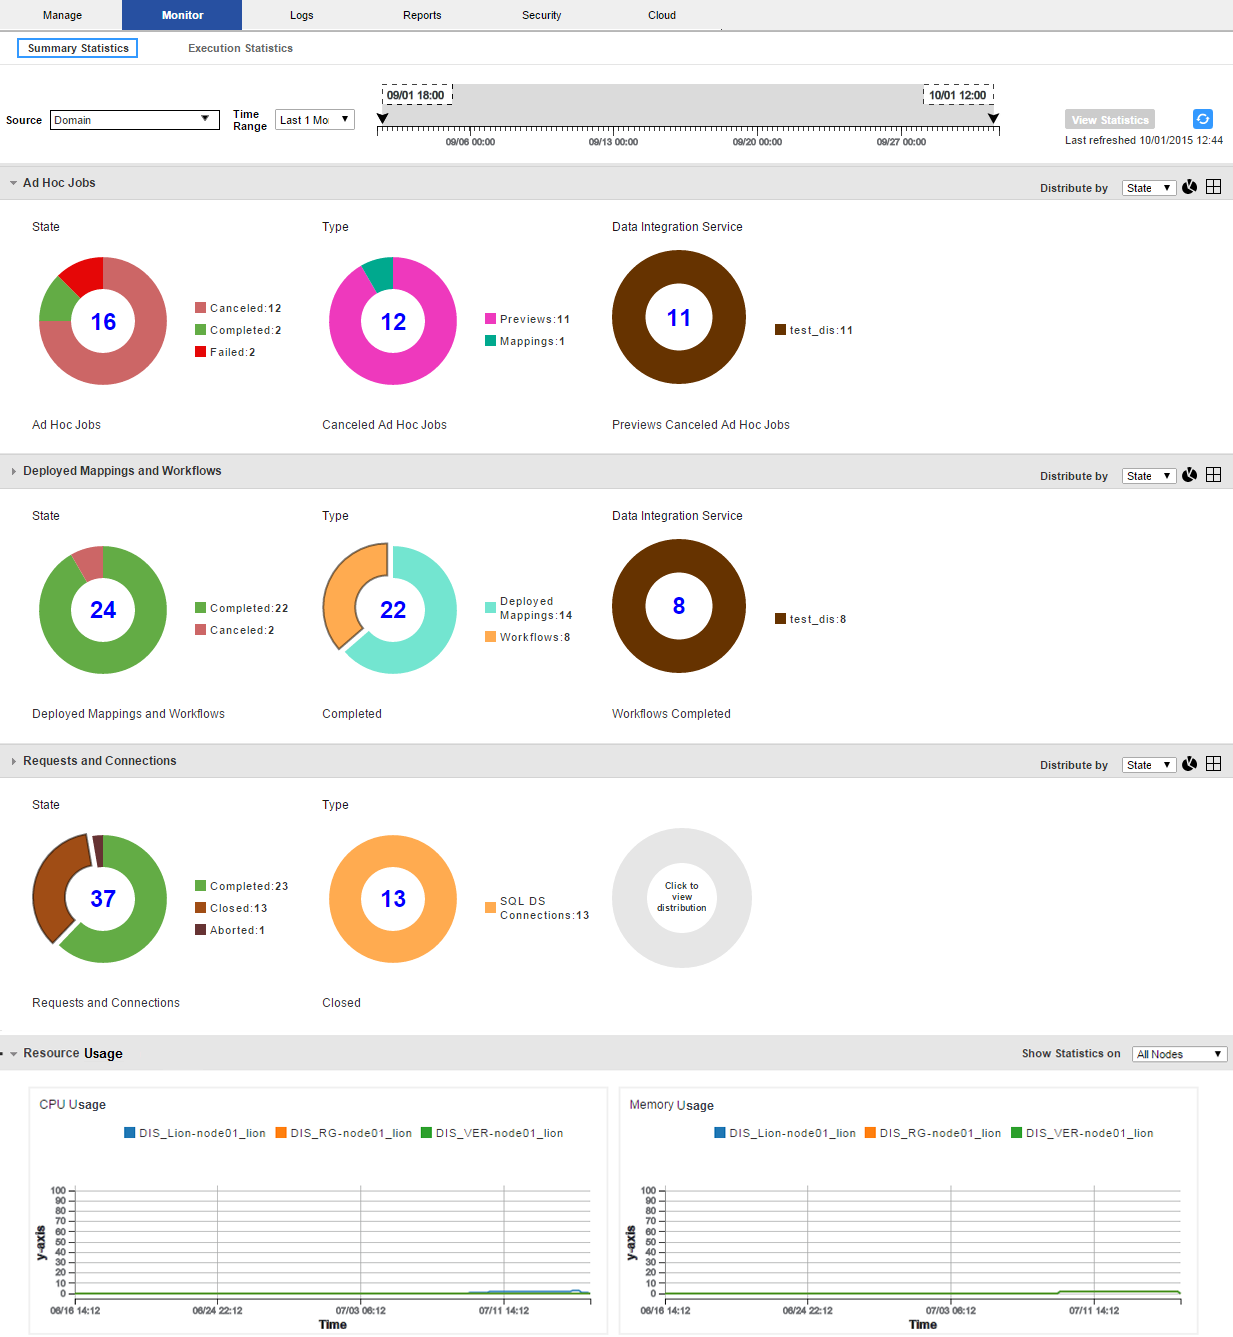 The execution statistics view shows the contents and status of the domain. The filter at the top of the page has the domain selected and displays a time range of the last month. Beneath the filter are horizontal panels that contain multicolored doughnut charts. The doughnut charts show the state and distribution of objects across the data integration services. There view shows the following panels in descending order: ad hoc jobs, deployed mappings and workflows, requests and connections. Each panel contains a doughnut that lists the quantity and state of the objects. The next doughnut lists the distribution of the objects by type. The last doughnut lists the distribution of objects by data integration service. Underneath the object panels is a resource usage panel that shows memory and cpu usage for the data integration services.